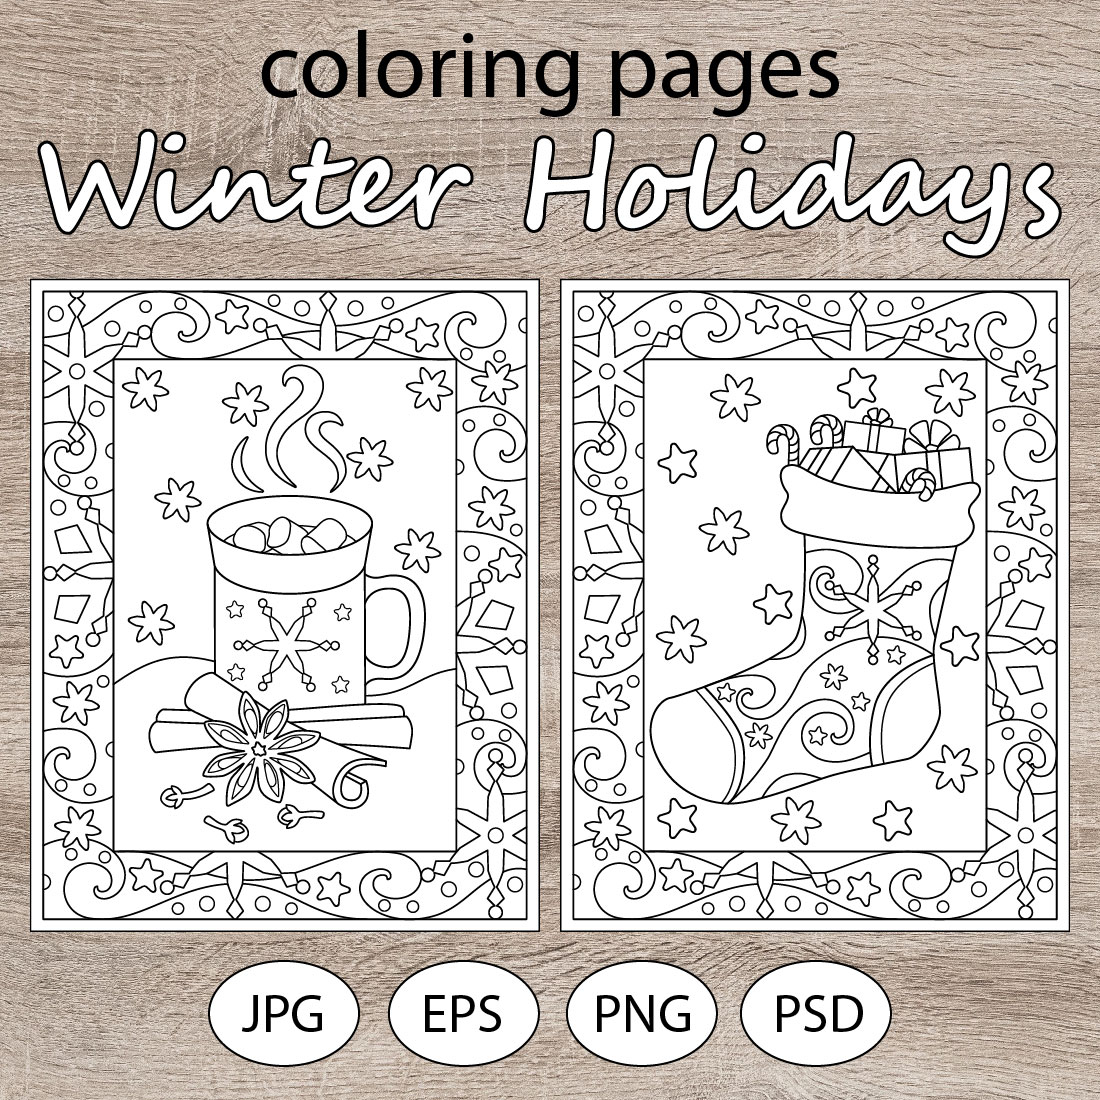 Color By Number Adult Coloring Book of Winter Birds: Winter Bird